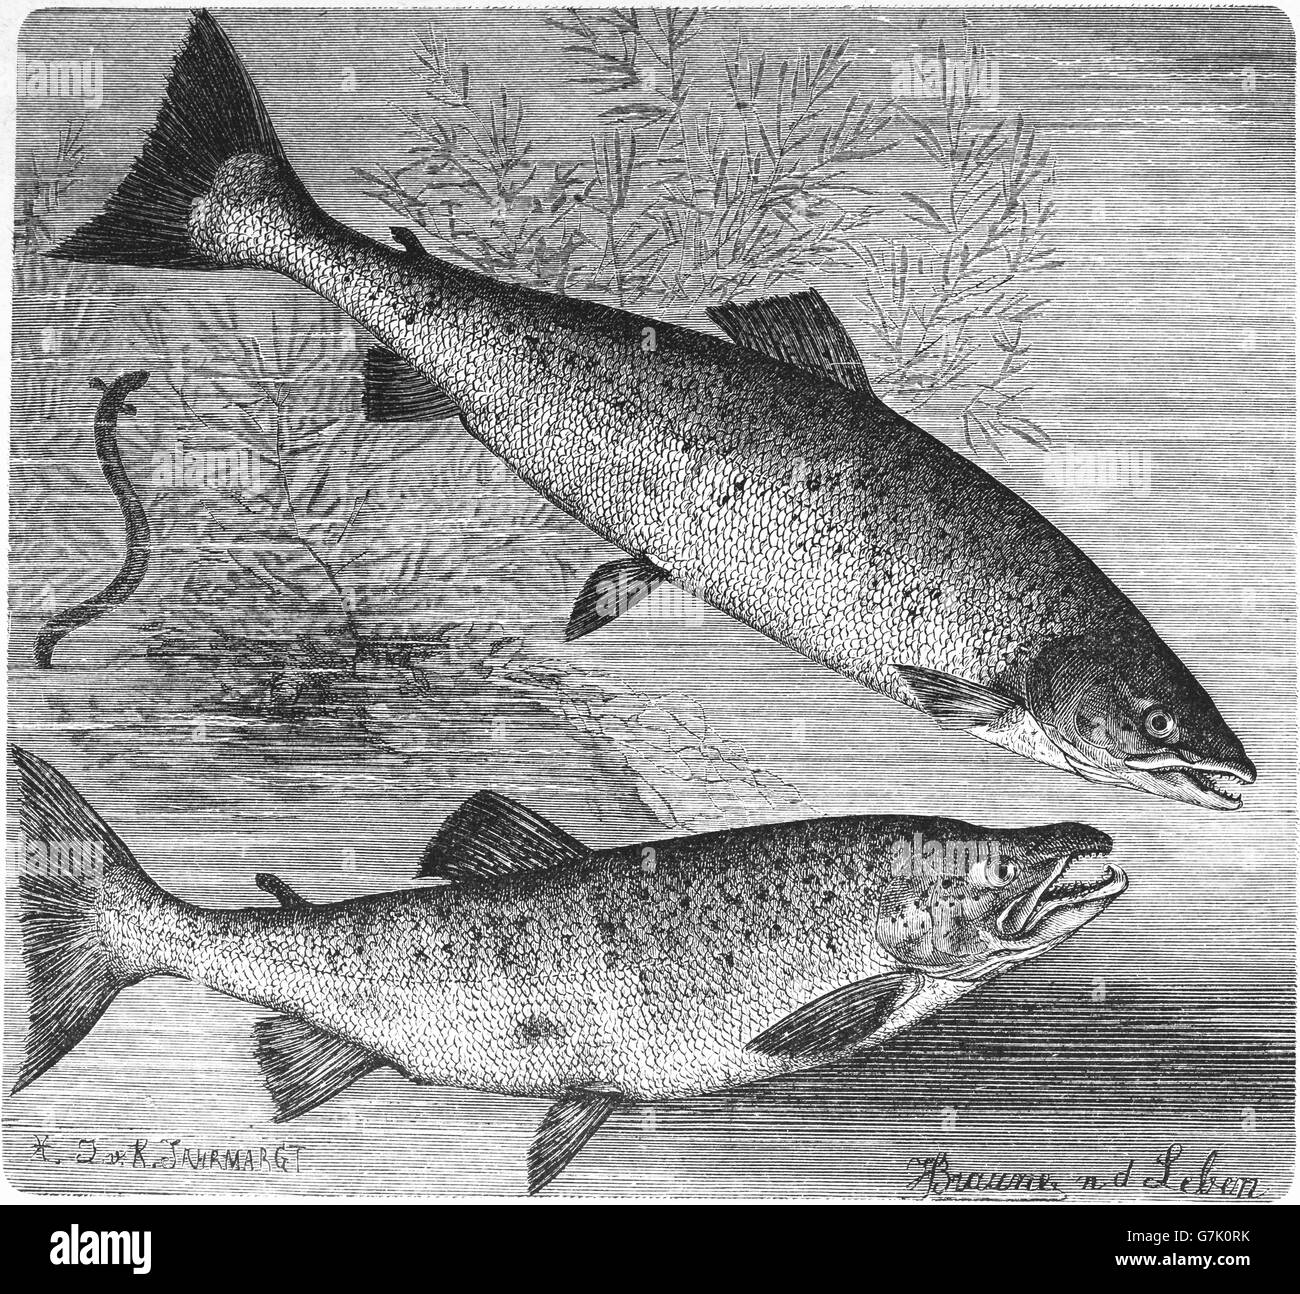 Atlantic salmon, Salmo salar and brown trout, Salmo trutta, illustration from book dated 1904 Stock Photo